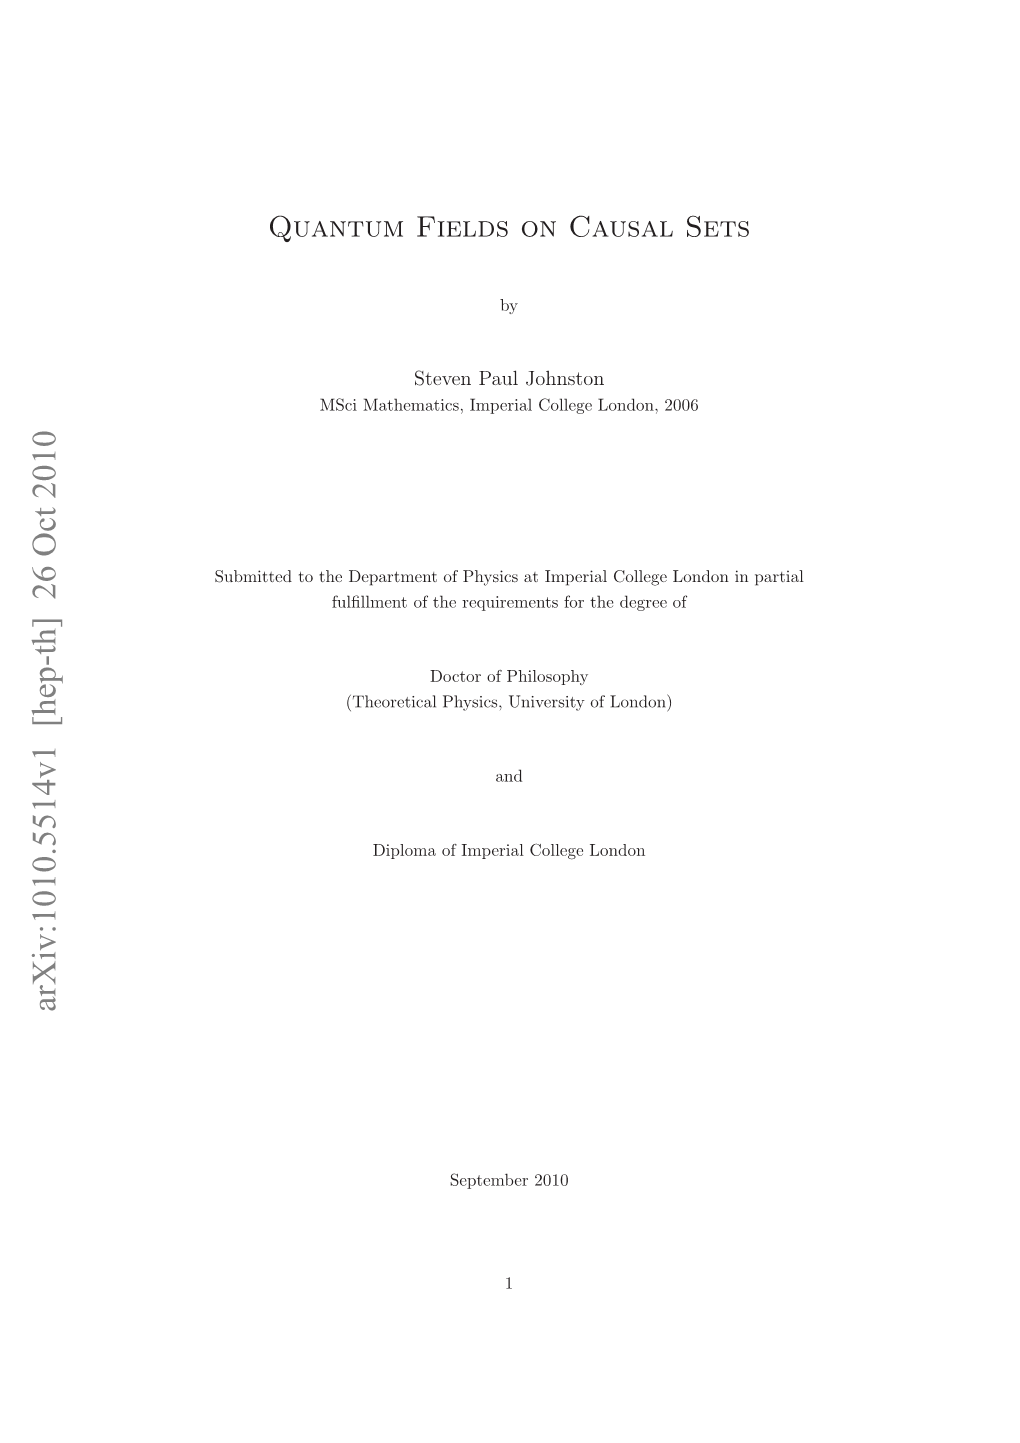 Quantum Fields on Causal Sets